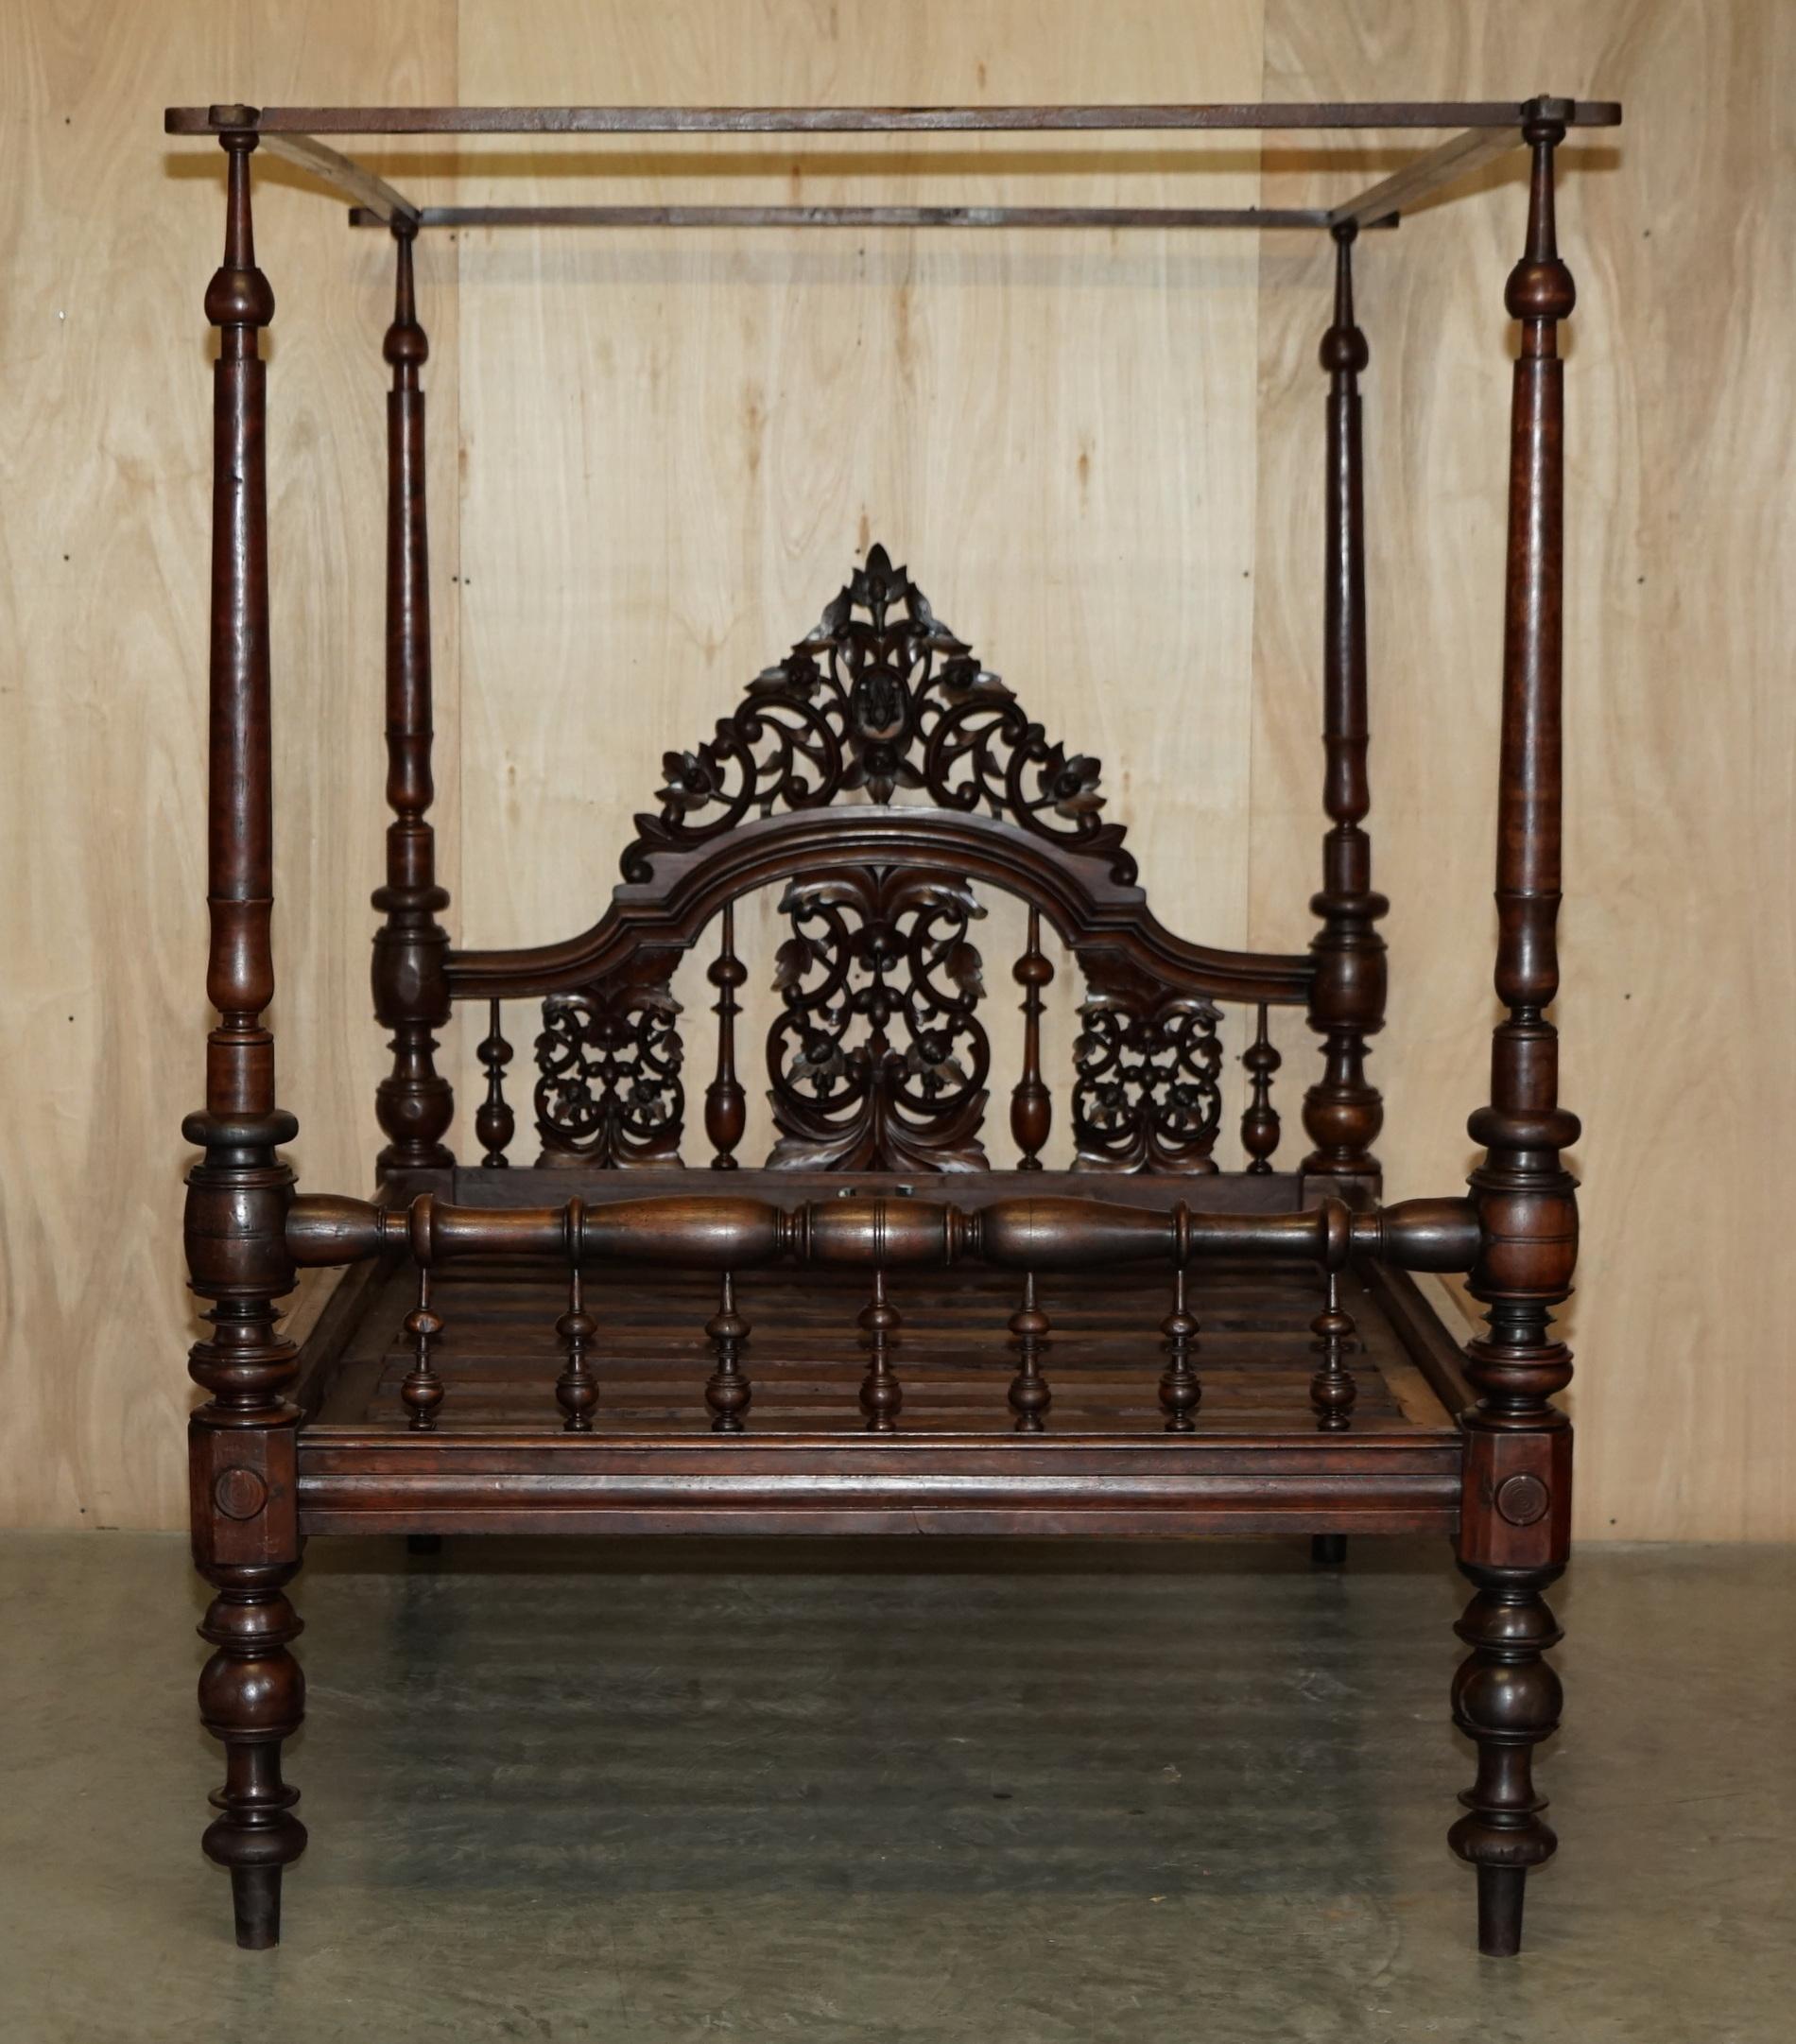 We are delighted to offer for sale this very rare original circa 1780 English hand carved Mahogany four post bed.

These beds are about as rare and collectable as they come, the frame is all original, it has beautifully carved and fluted columns